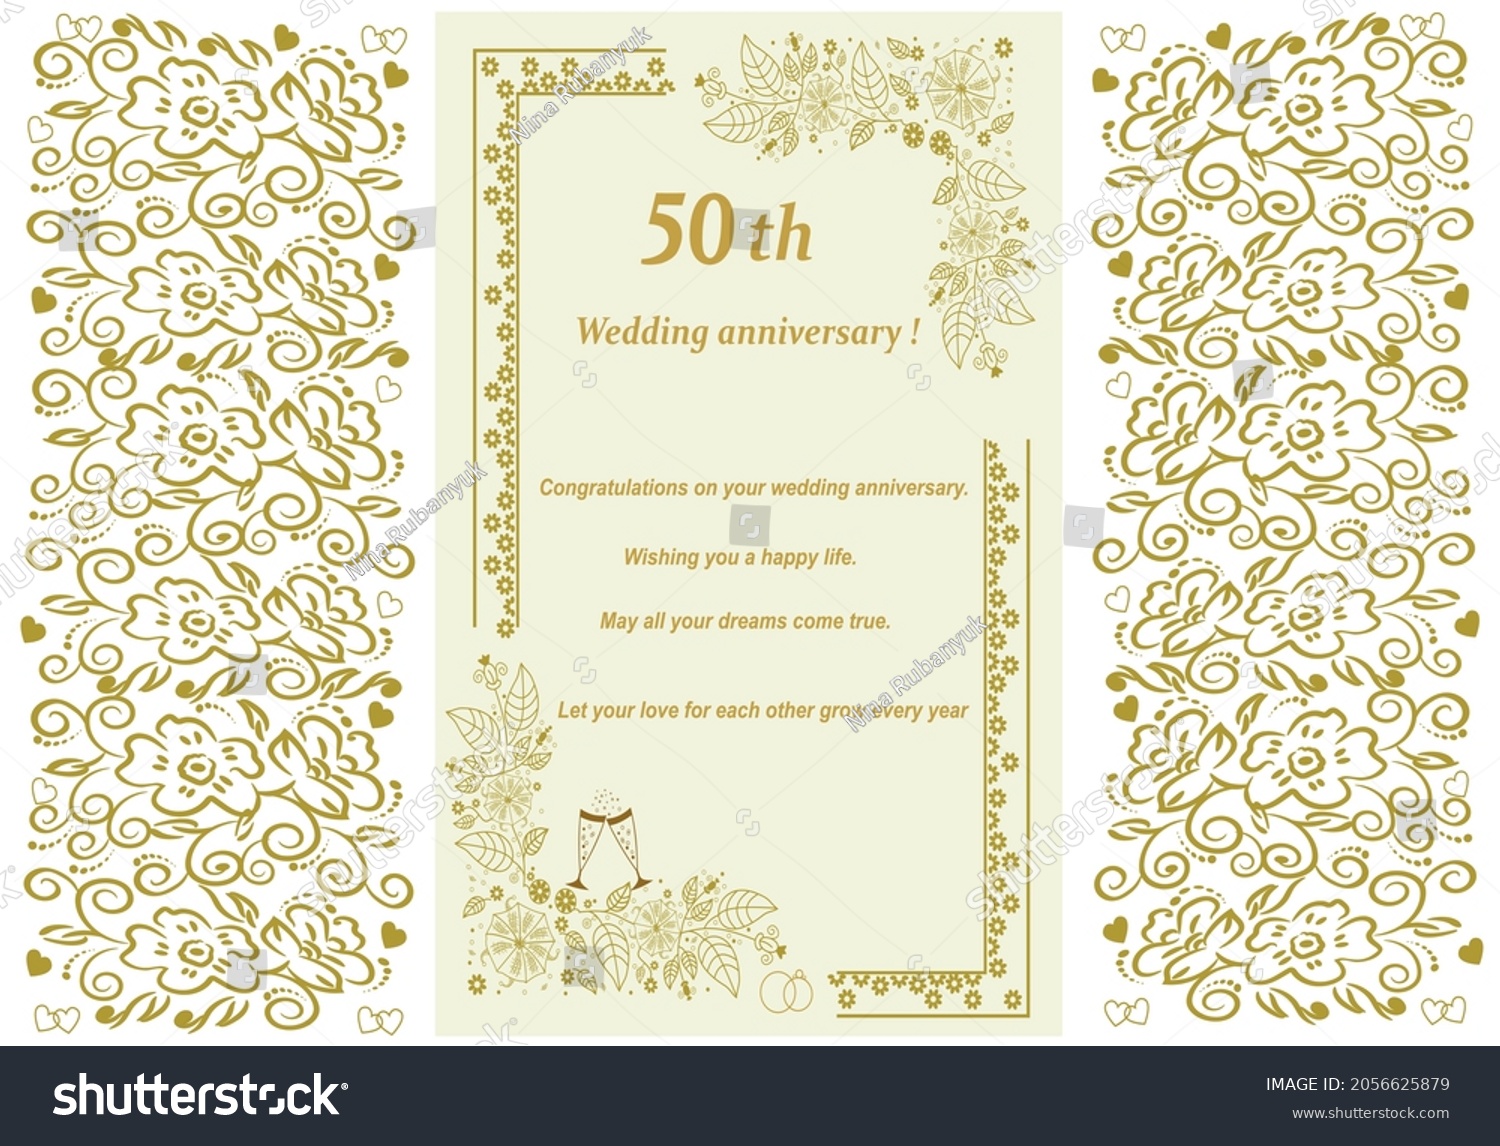 SVG of 50th Wedding Anniversary Invitation. Beautiful  graphics  illustration. Gold abstract decorative frame. Ornate patterns with flowers. Used for wedding invitations, postcard decoration, text writing svg